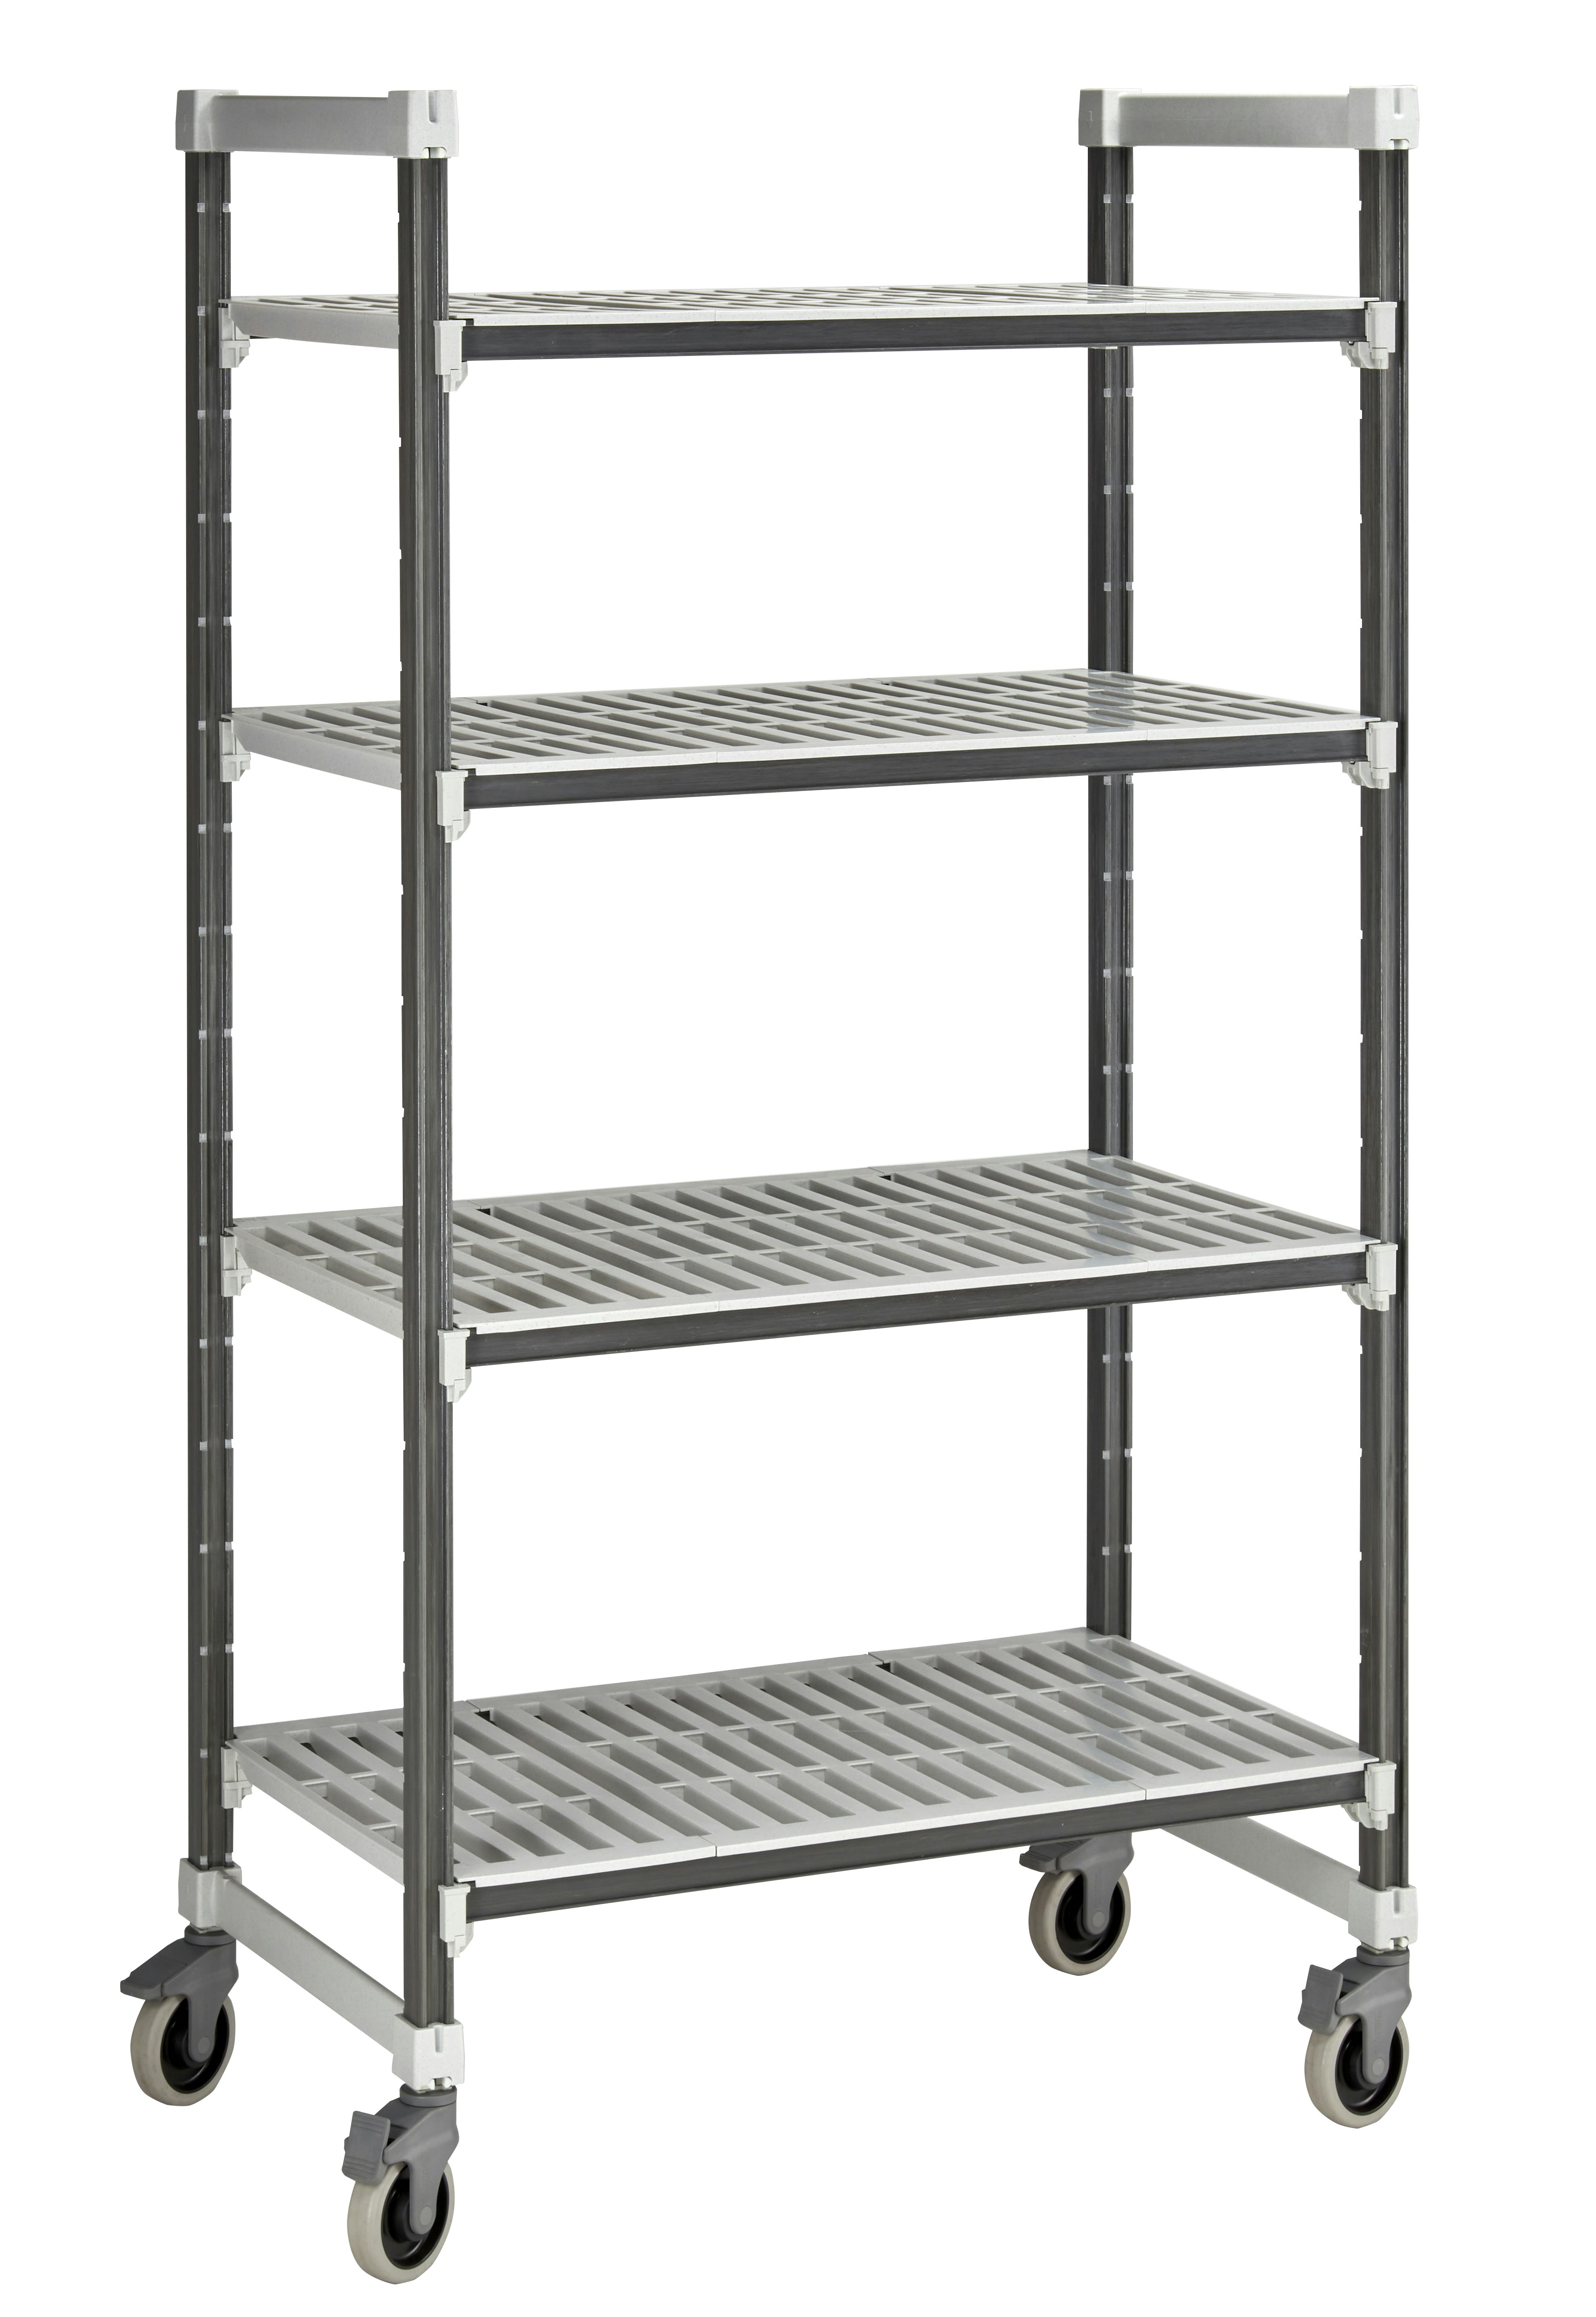 Elements® XTRA Series Mobile Starter Units - Vented Shelves | Cambro